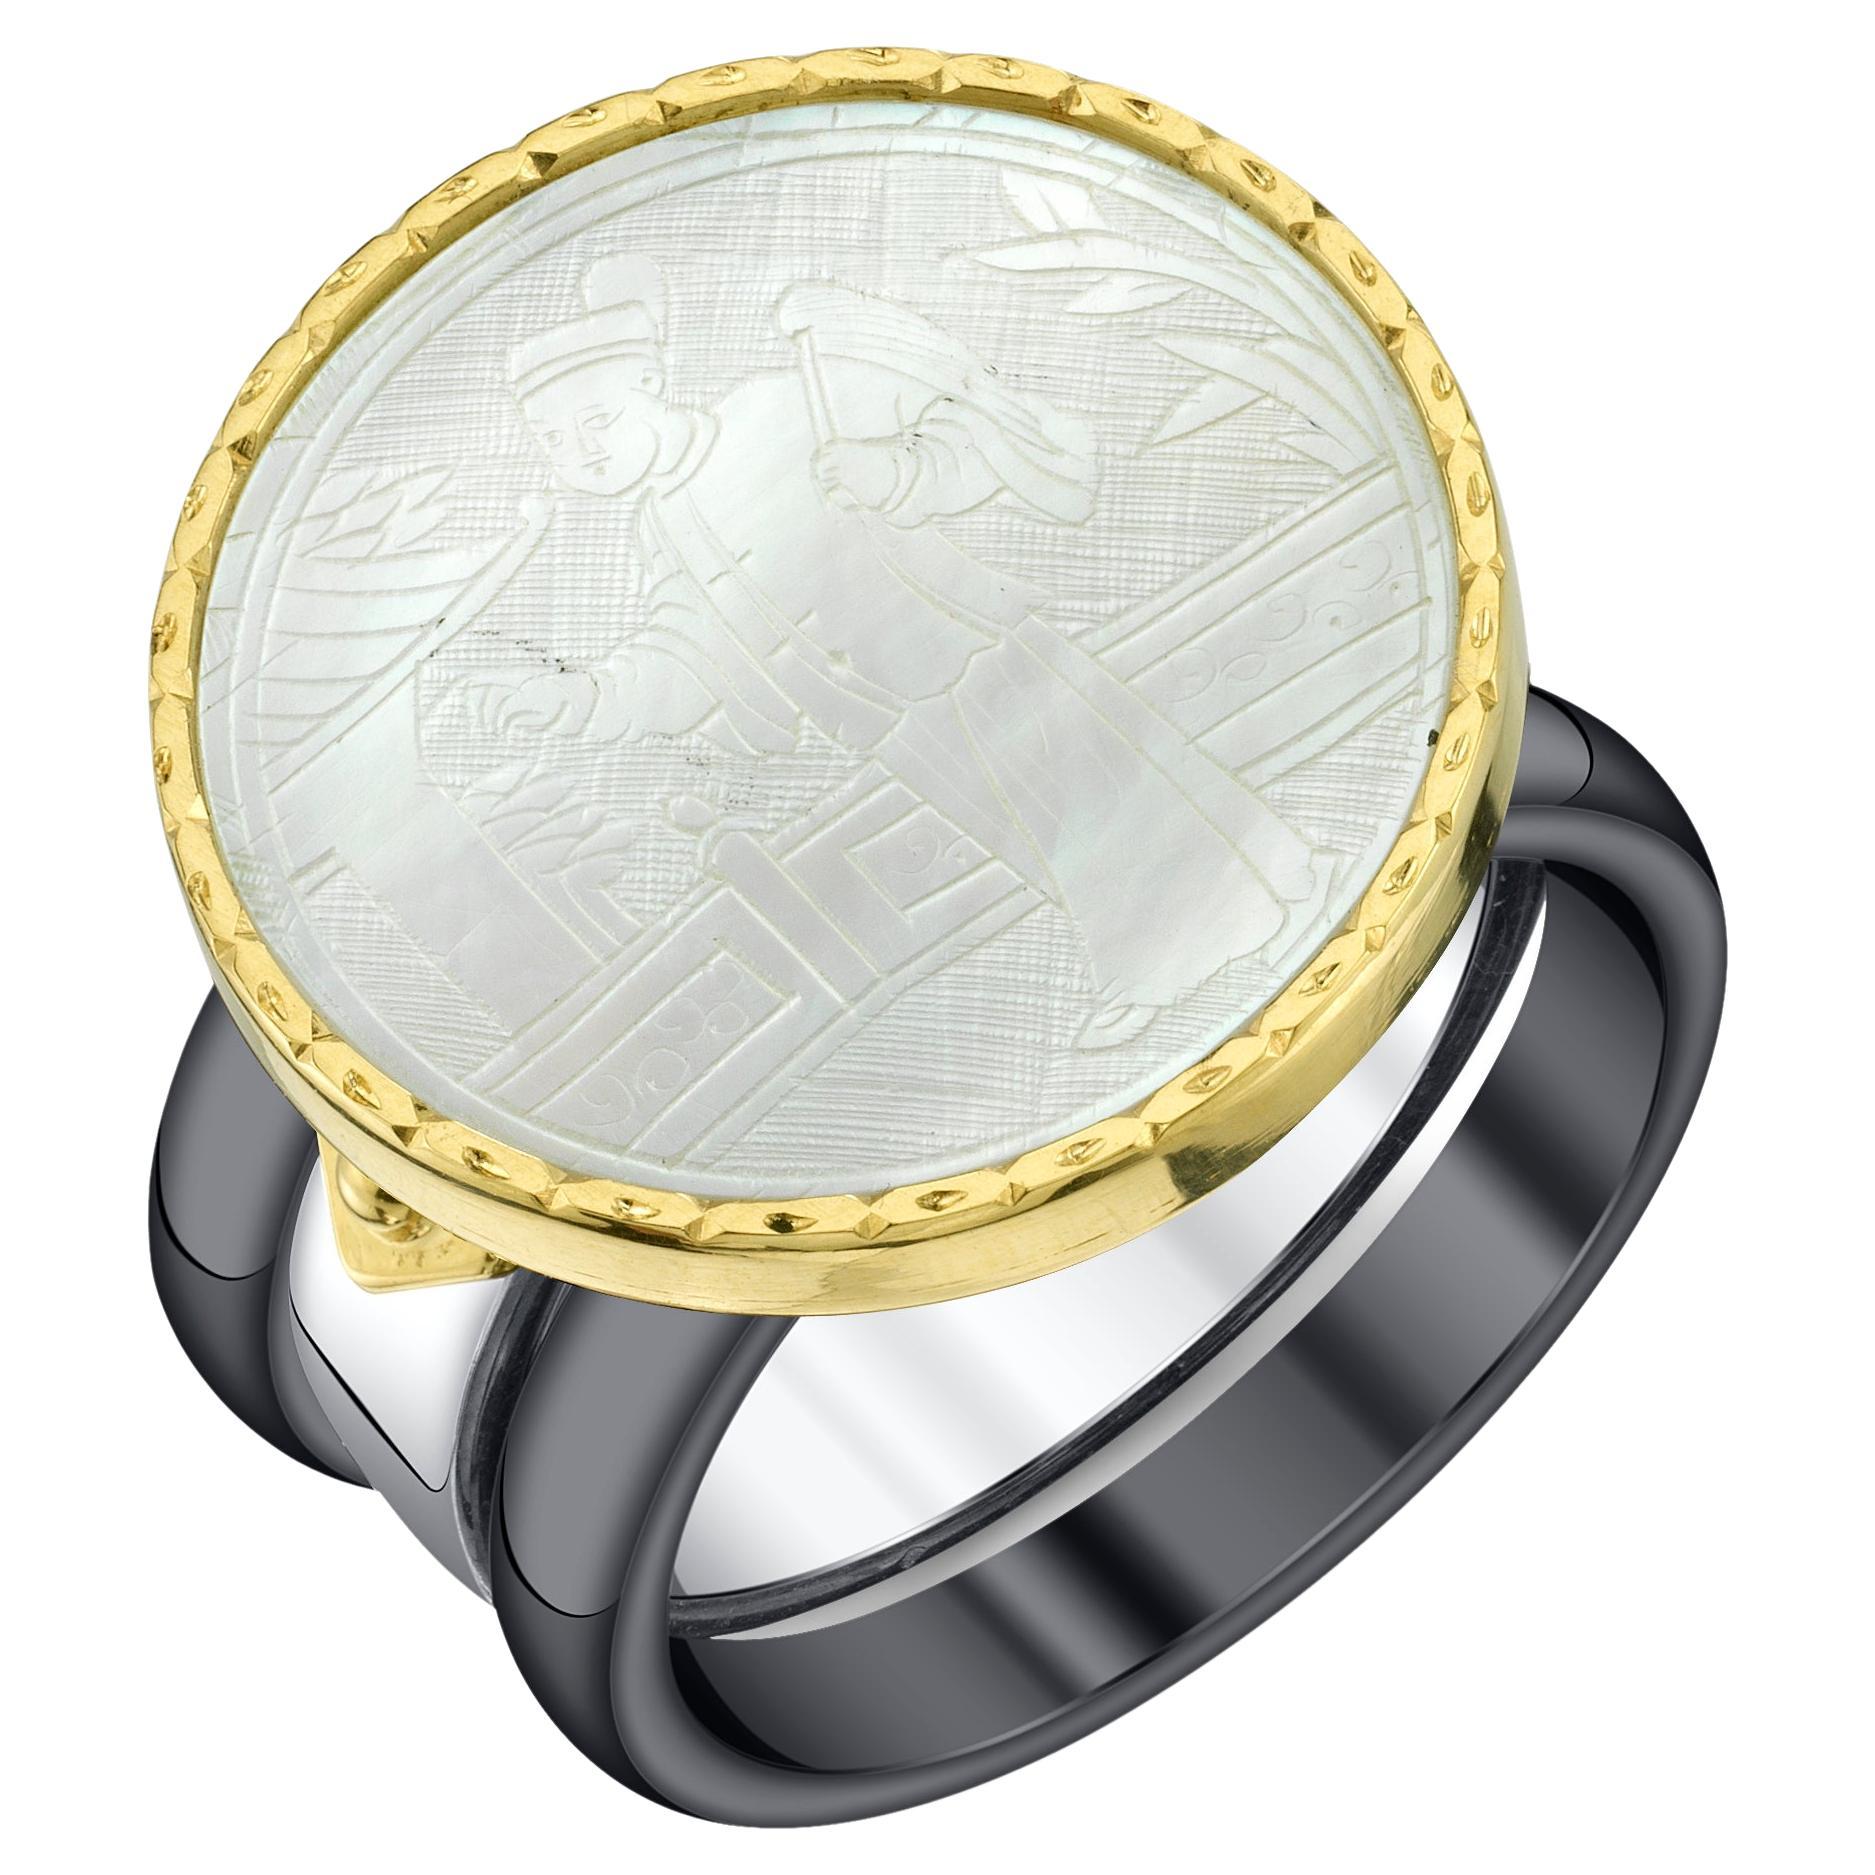 Antique Engraved Mother-of-Pearl Ring in 18k Gold with Removable Ceramic Bands For Sale